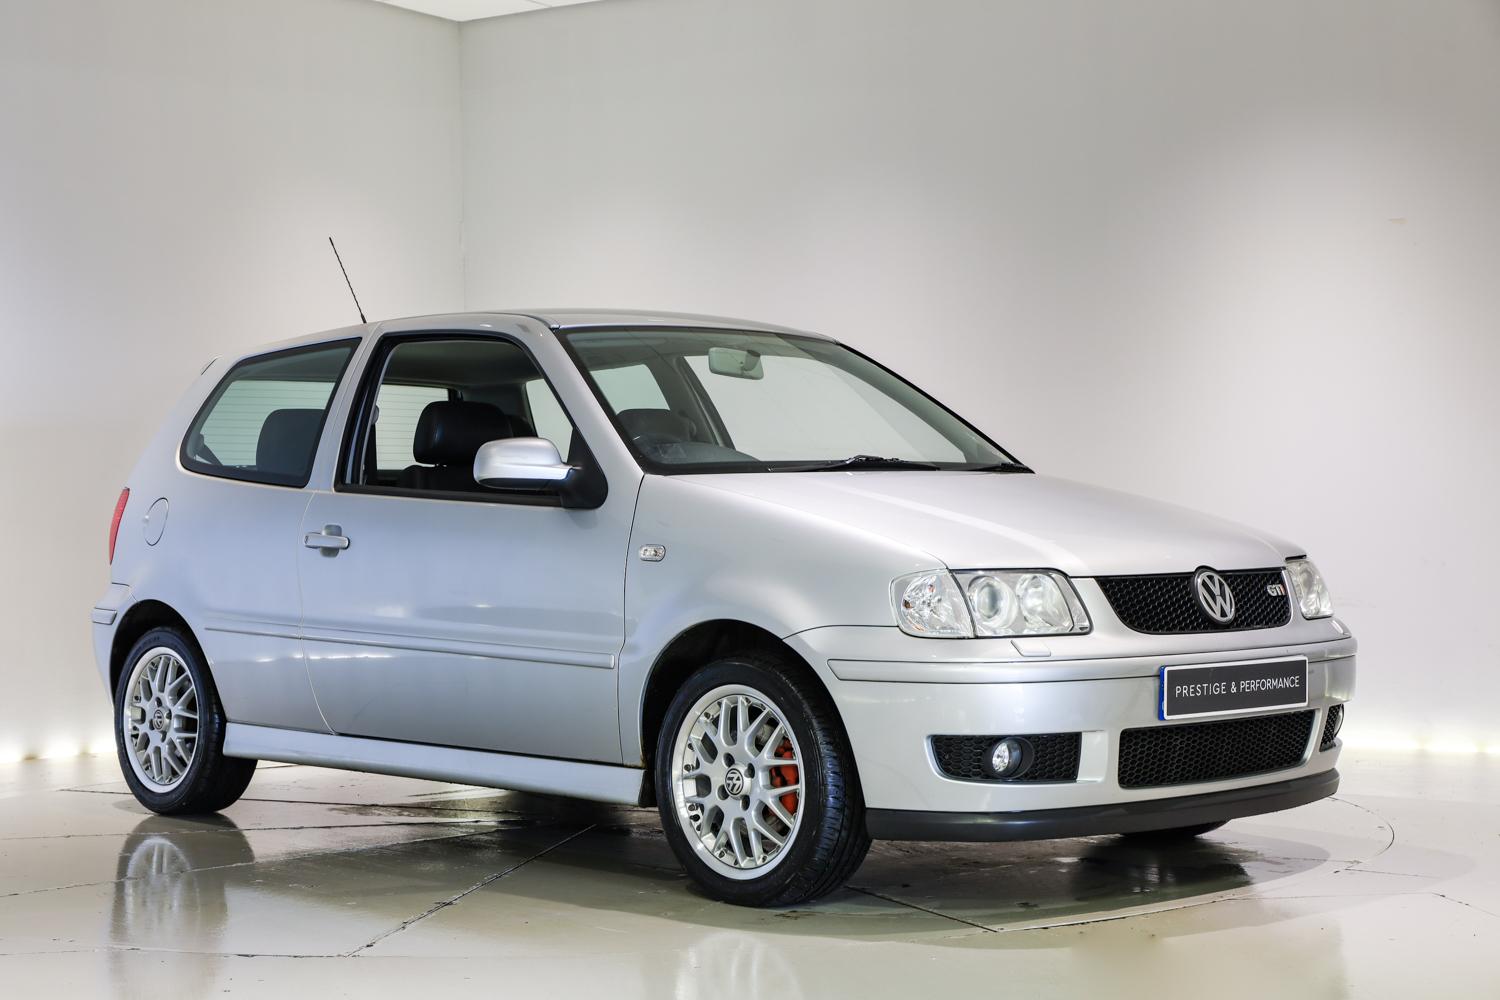 Used Volkswagen Polo 2000 Cars For Sale | AutoTrader UK